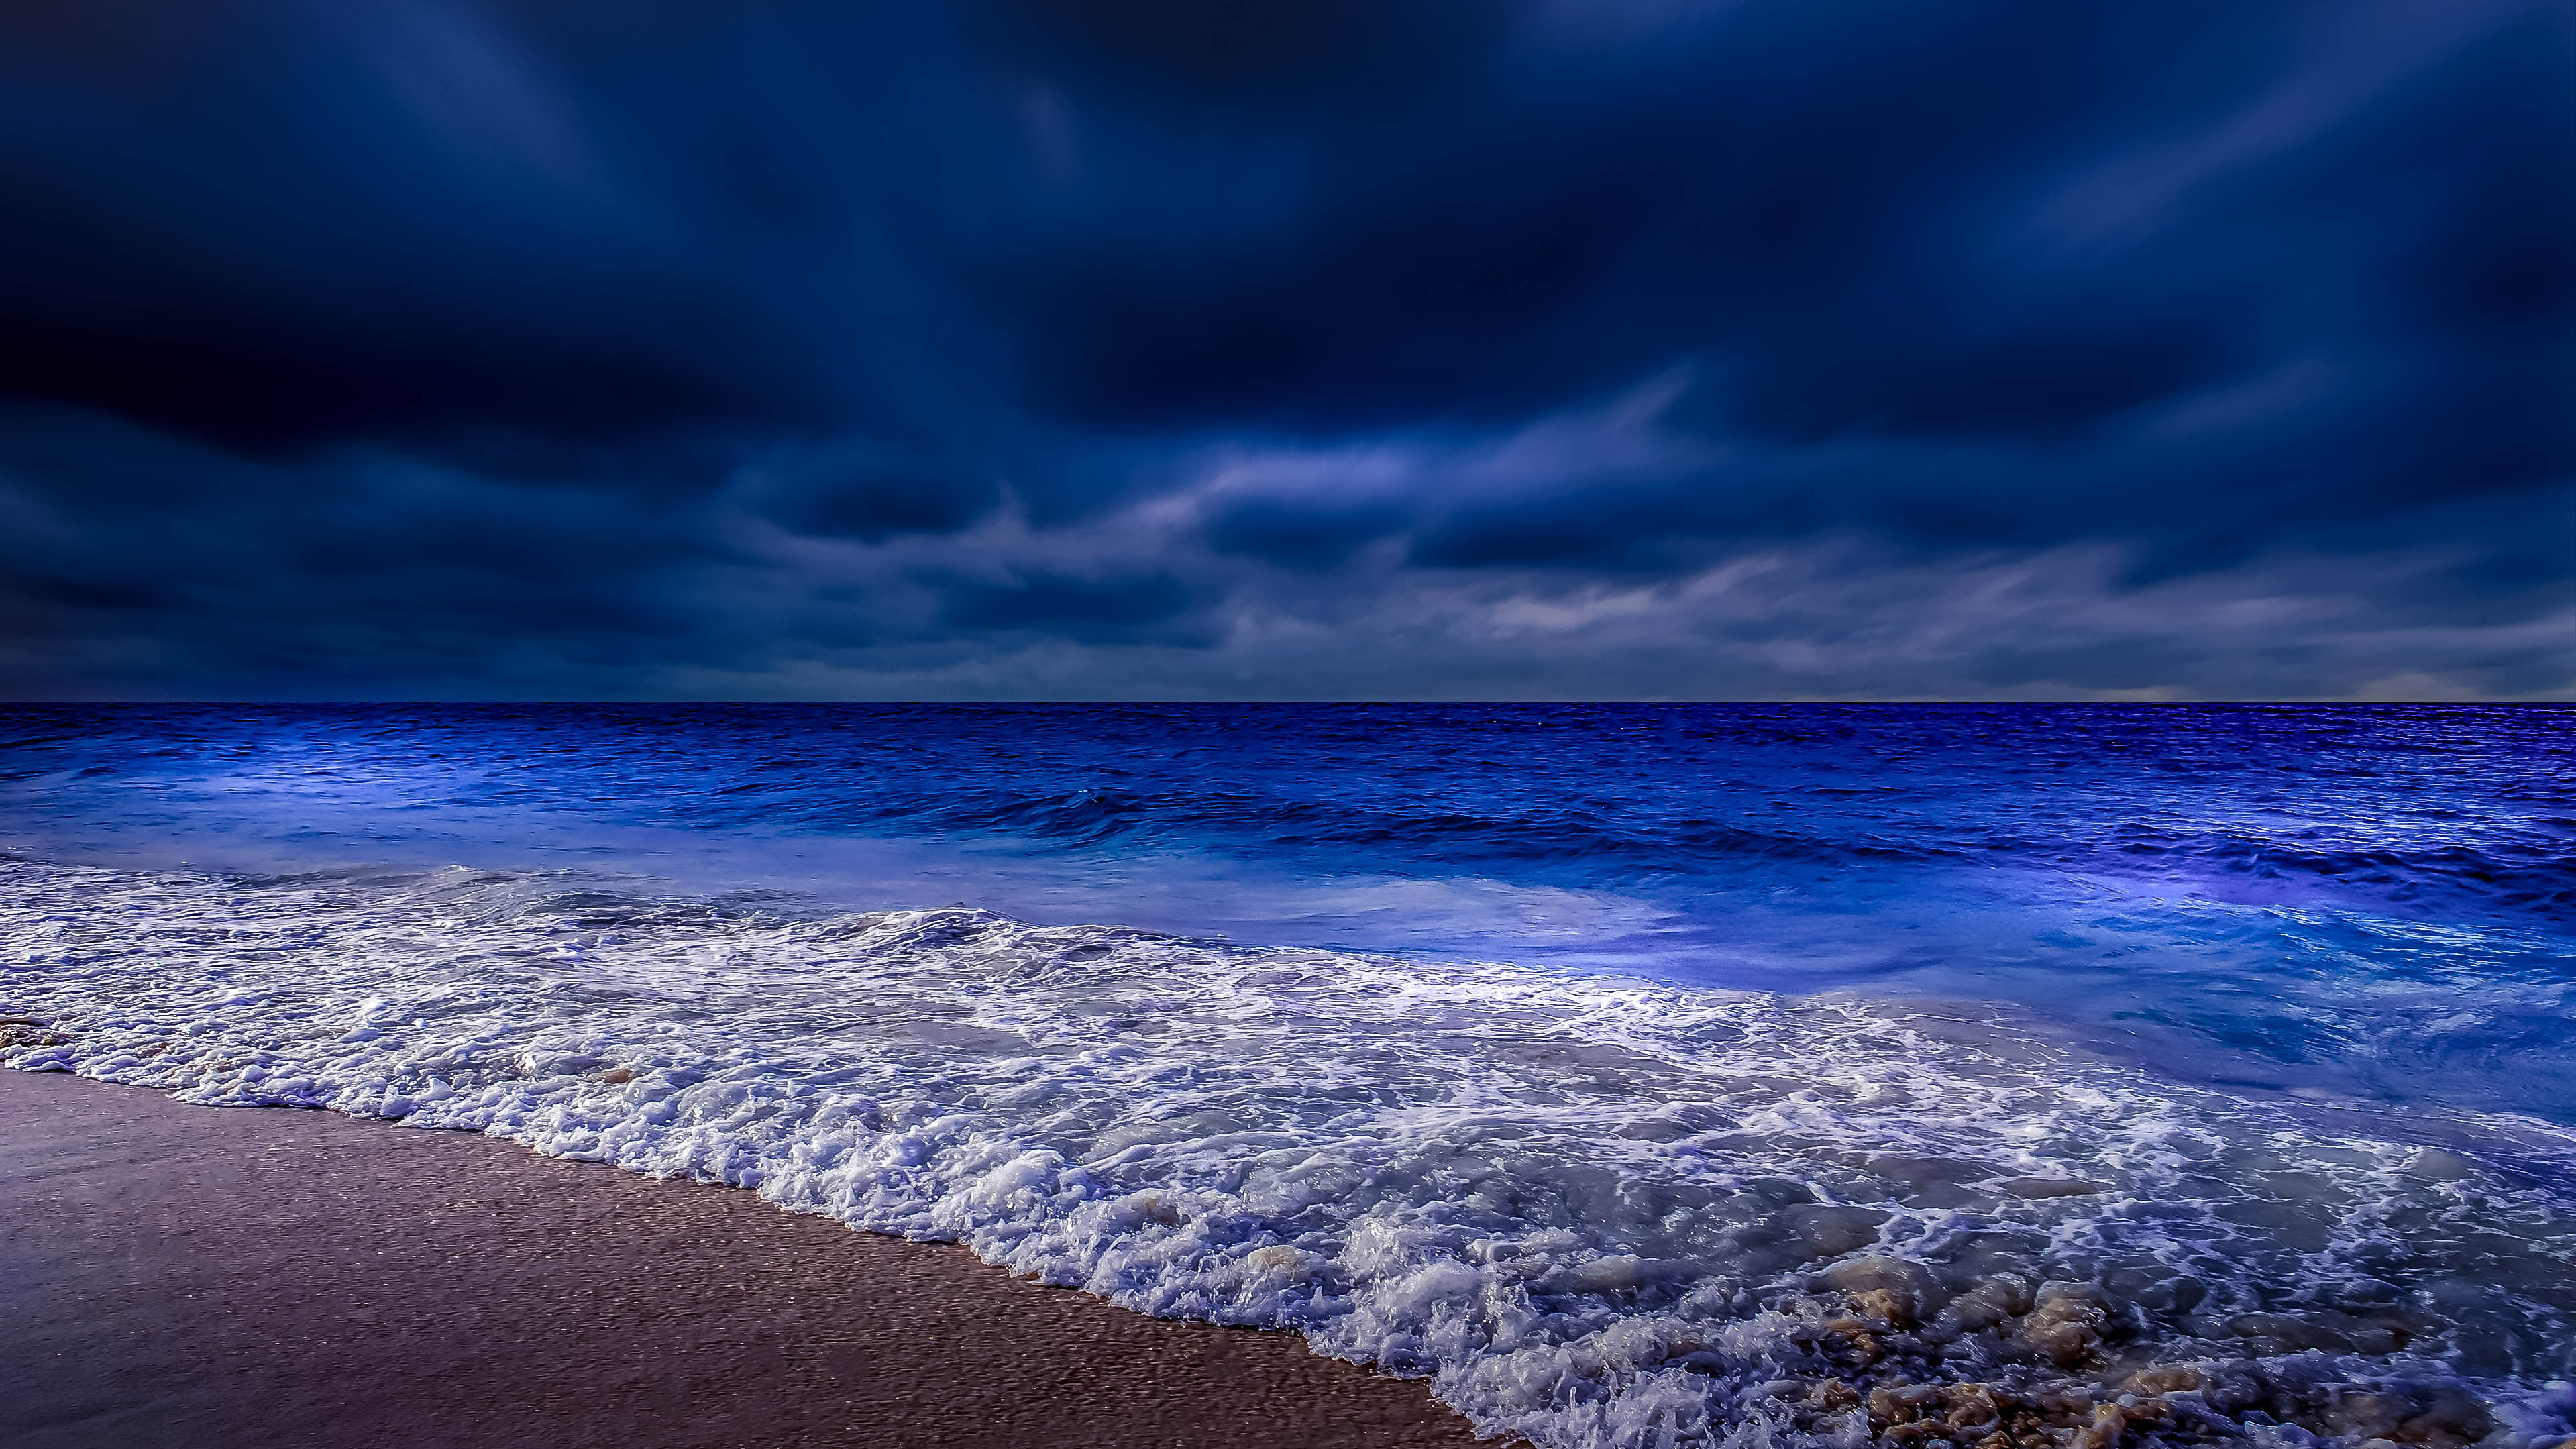 Sea Shore Waves At Night Time 4k HD Nature 4k Wallpapers Images 73332 ...